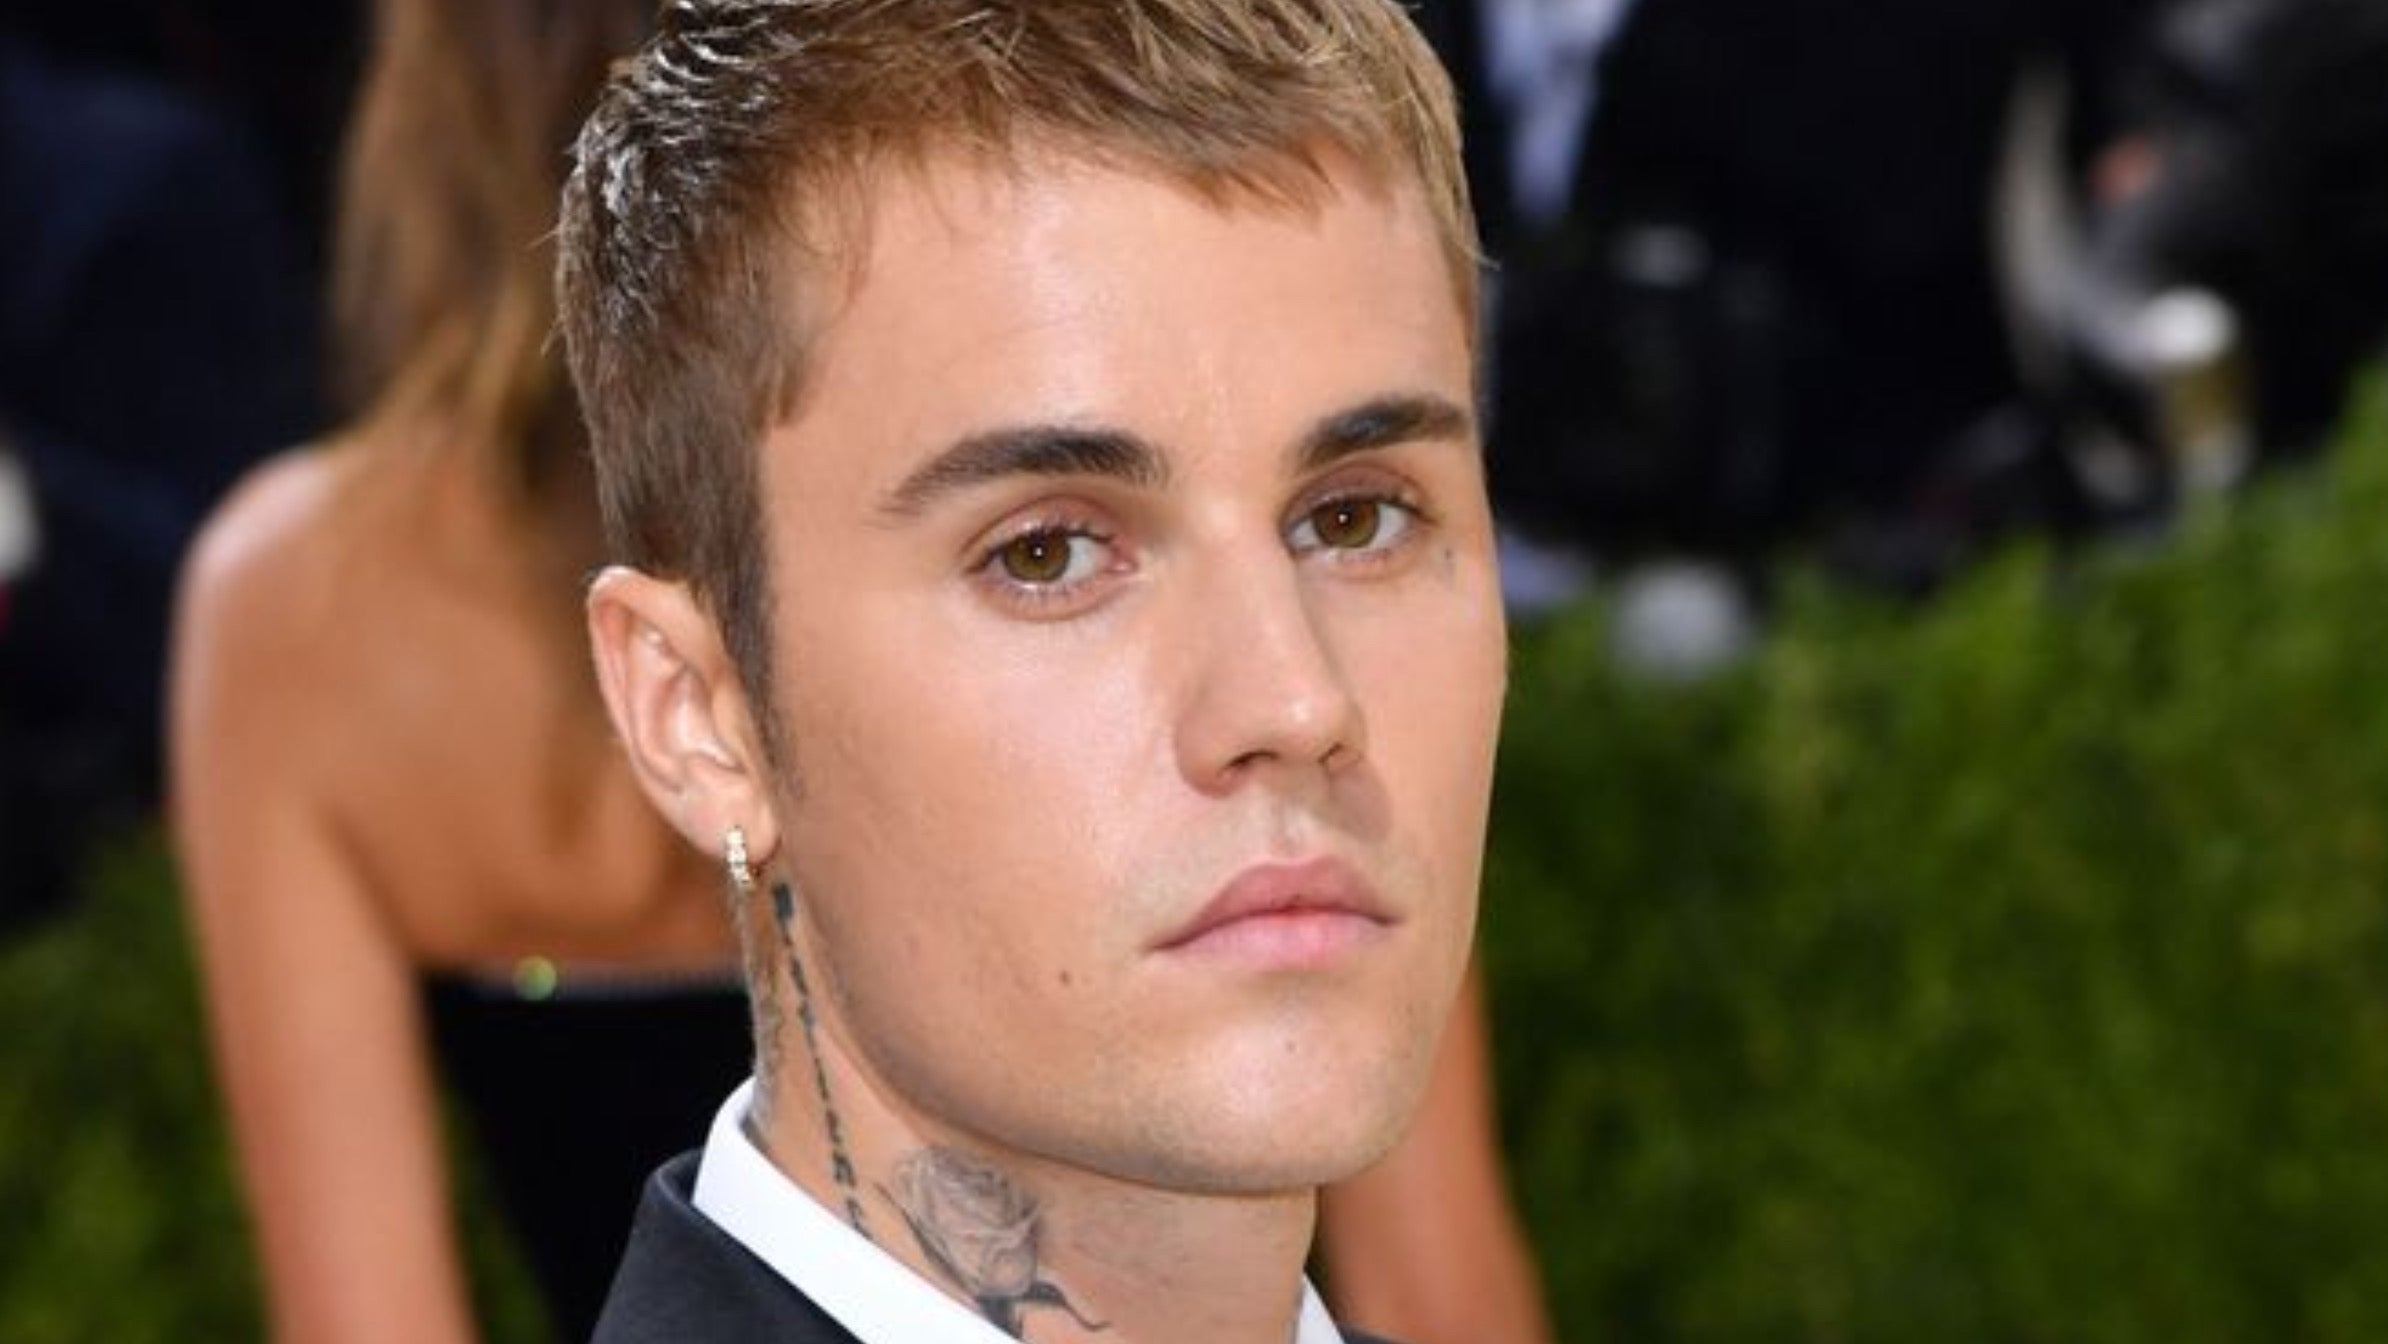 Justin Bieber sells the rights to his music catalog for $200 million, Magnate Daily